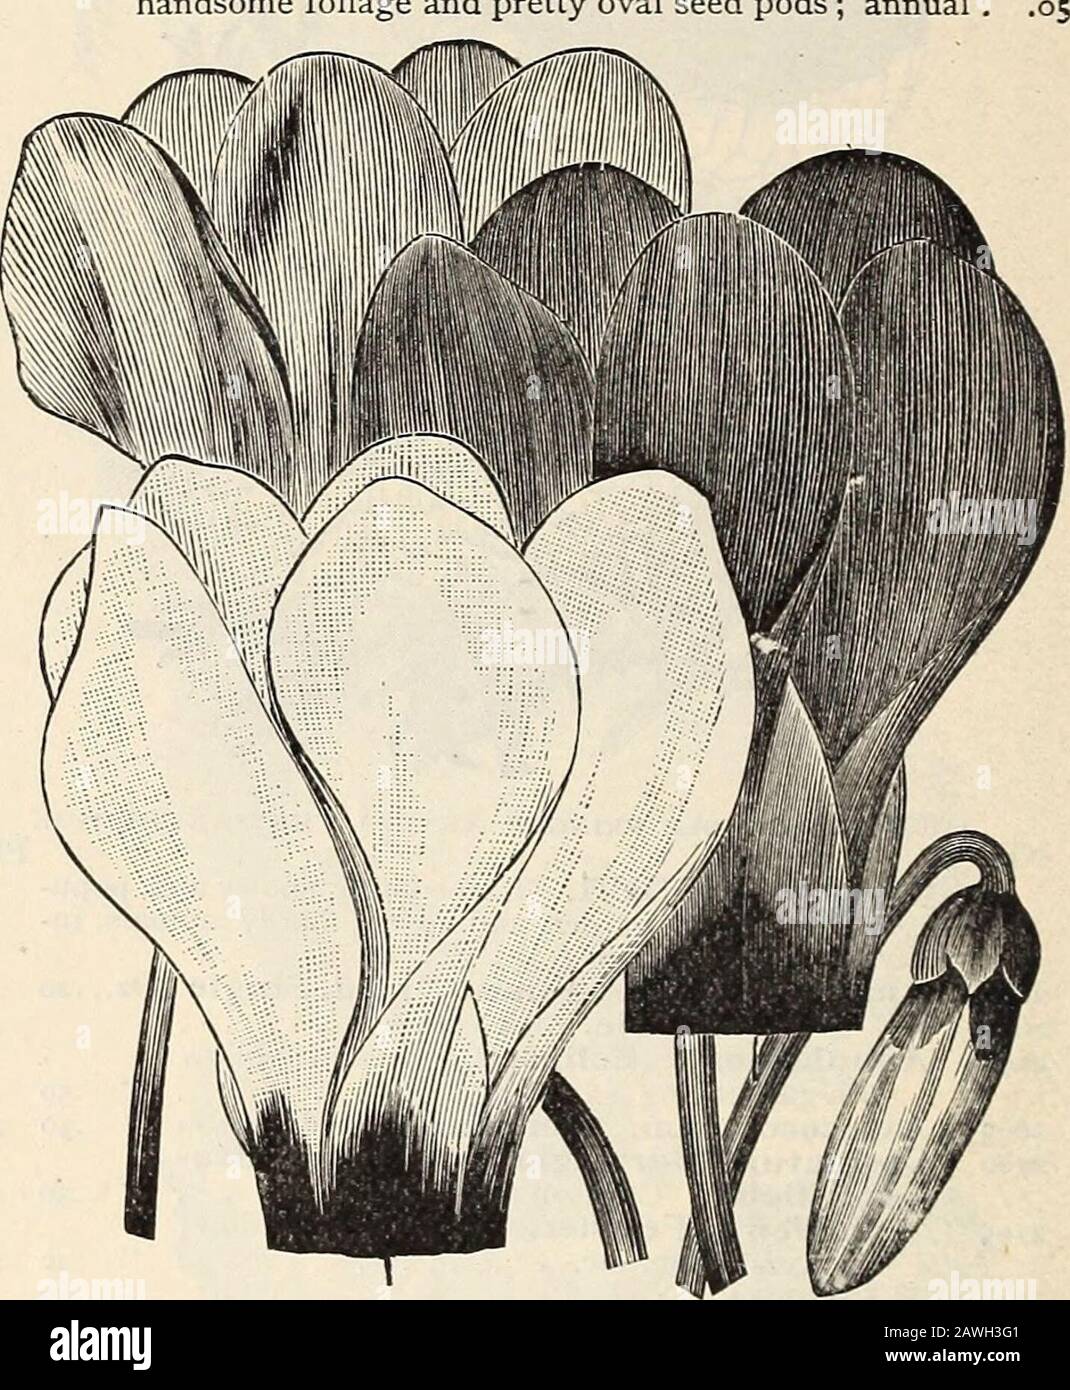 R& JFarquhar and Co'scatalogue, 1897 : reliable tested seeds plants, bulbs fertilizers tools, etc. . ade .80 Red No. COREOPSIS. See Calliopsis. 3020 COSMANTHUS Fimbriatus. Pkt. petals; flesh. Fine annual; fringedThree-fourths foot 05 3025 COSMIDIUM Burridgianum. Large, velvety. Core-opsis-like, brown flowers; annual. Two feet ... .053030 — Engelmanni. Vellow; fine 05 30553060 COWSLIP. (Primula Veris.) Charming, very early-flowering, dwarf perennial.Finest Mixed Vellow. Wood Primrose of Britain 3065 CREPIS. (Hawk Weed.) Showy, hardy annual; blooms all summer. One foot . 05 3070 CRUCIANELLA Styl Stock Photo